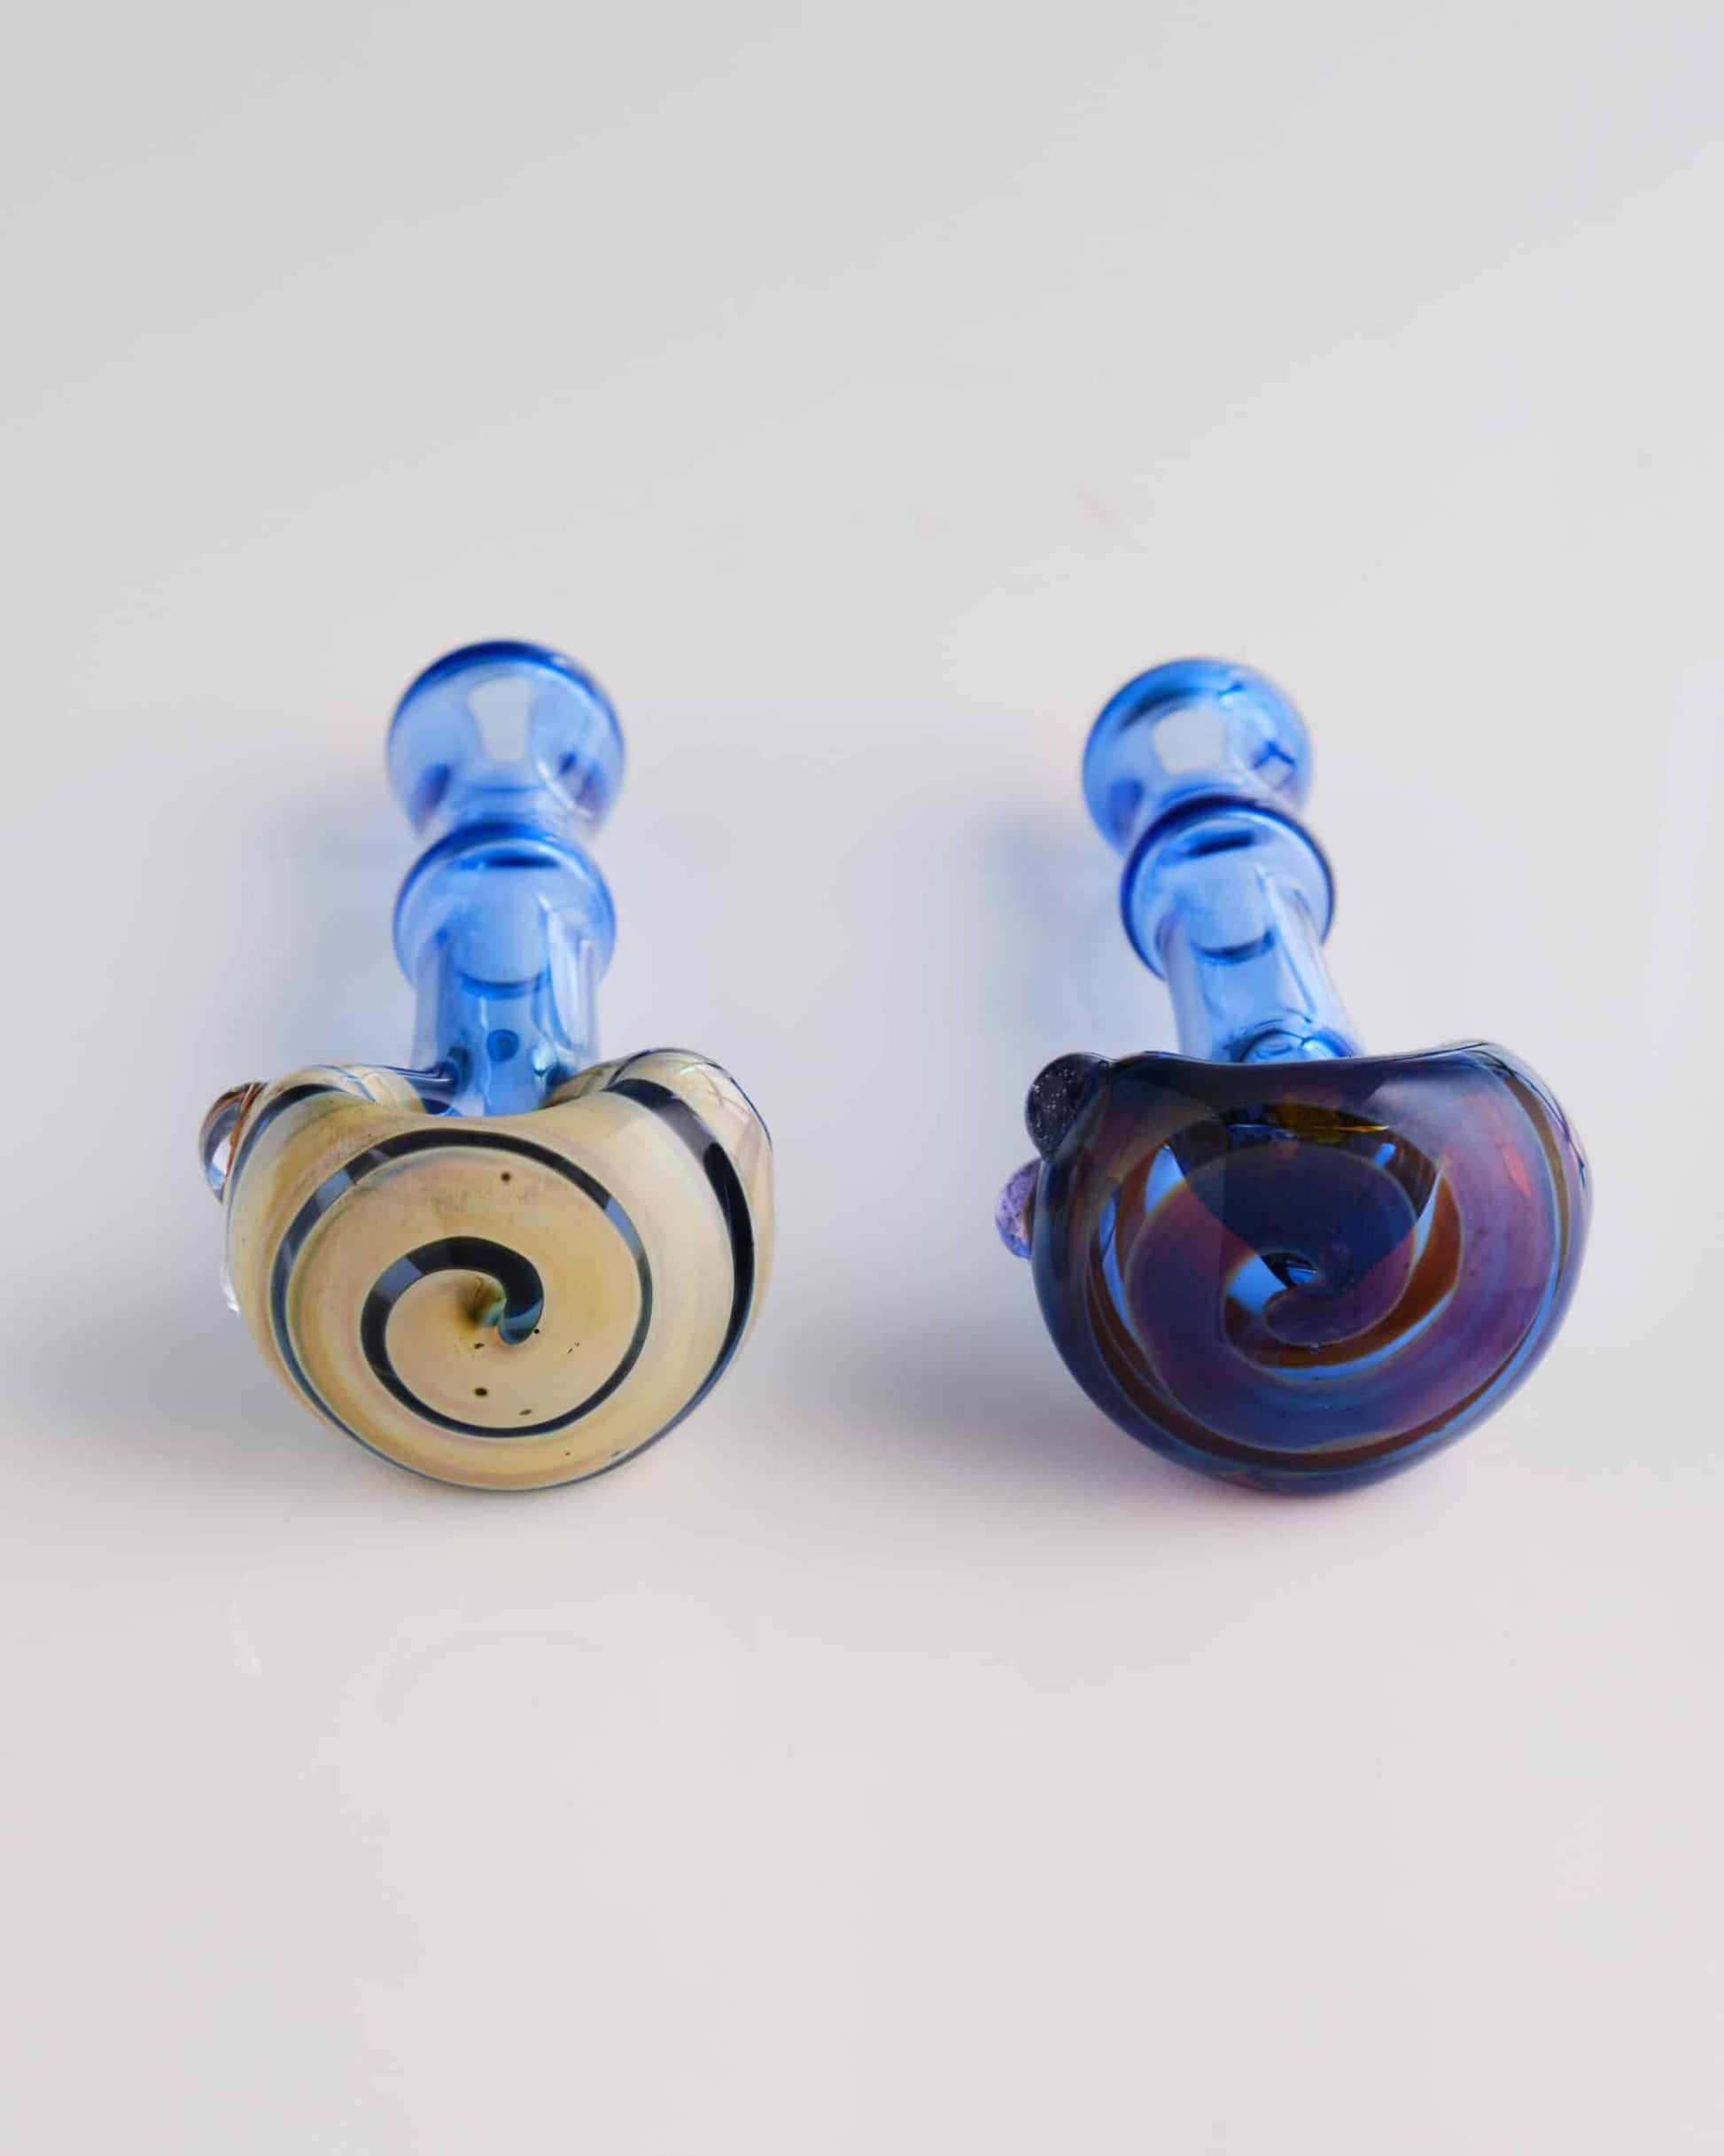 innovative design of the Blue Spoon Pipe w/ Purple Swirl by Willy That Glass Guy